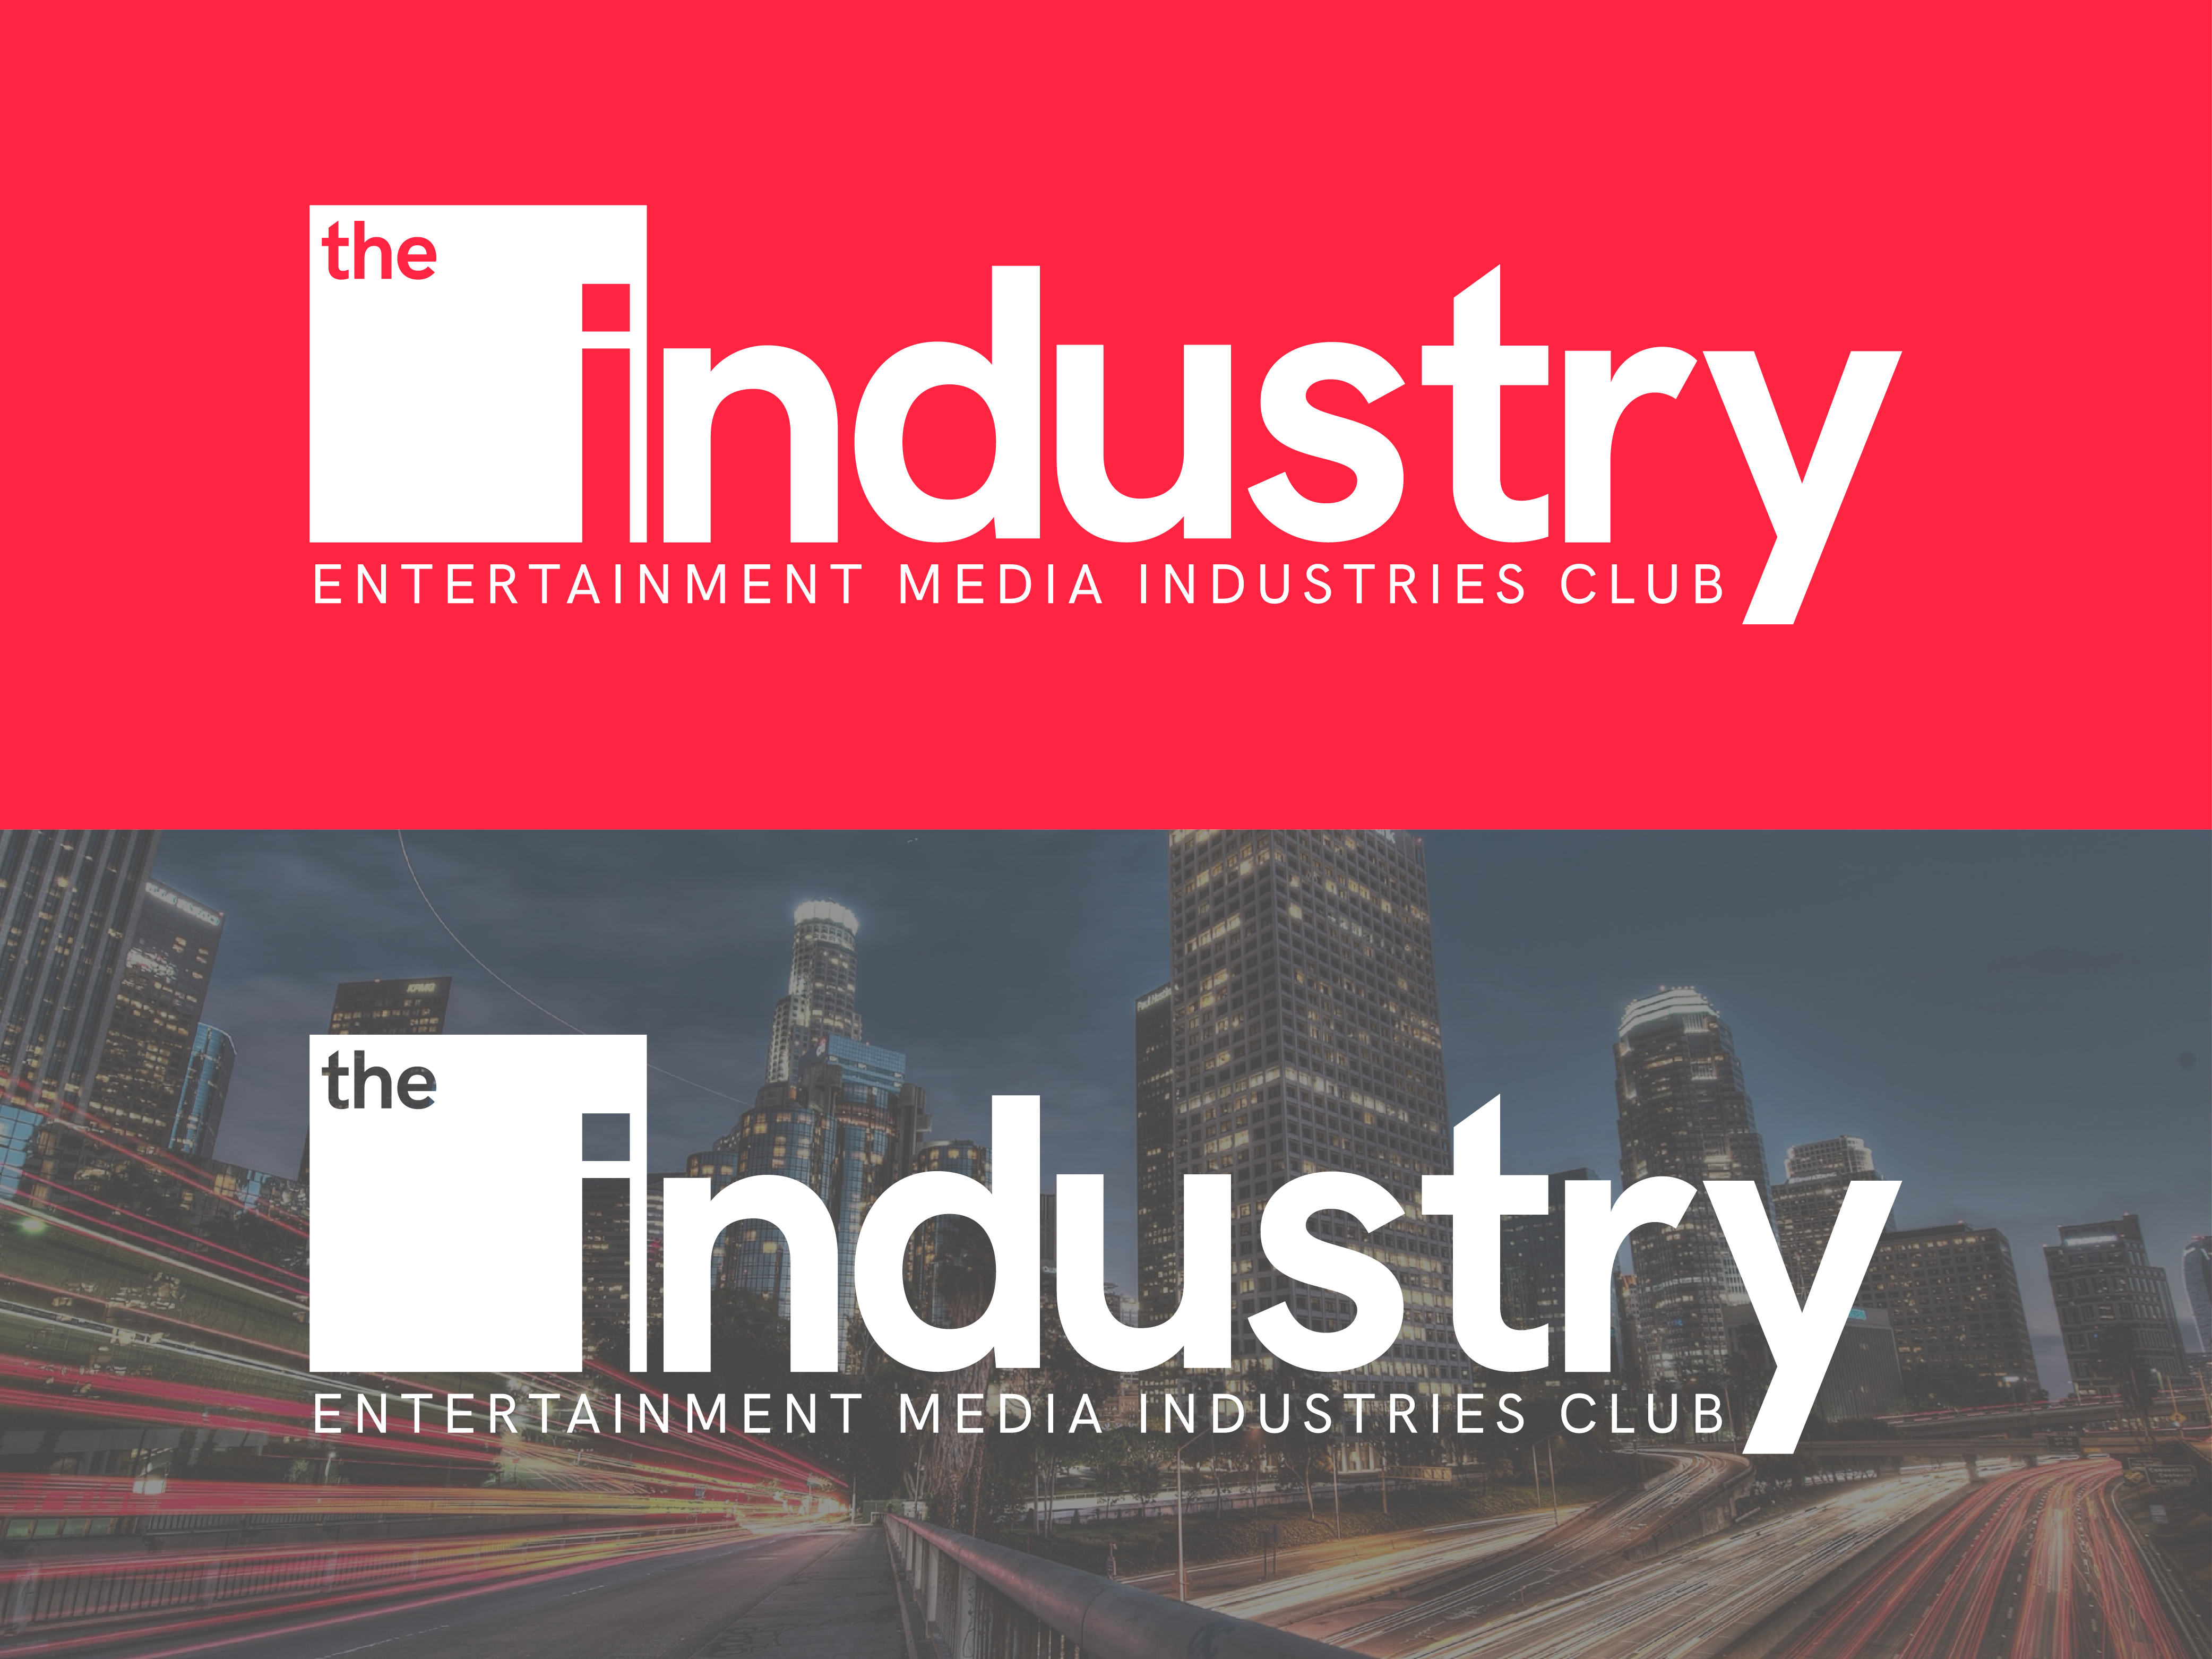 The Industry wordmark on two backgrounds